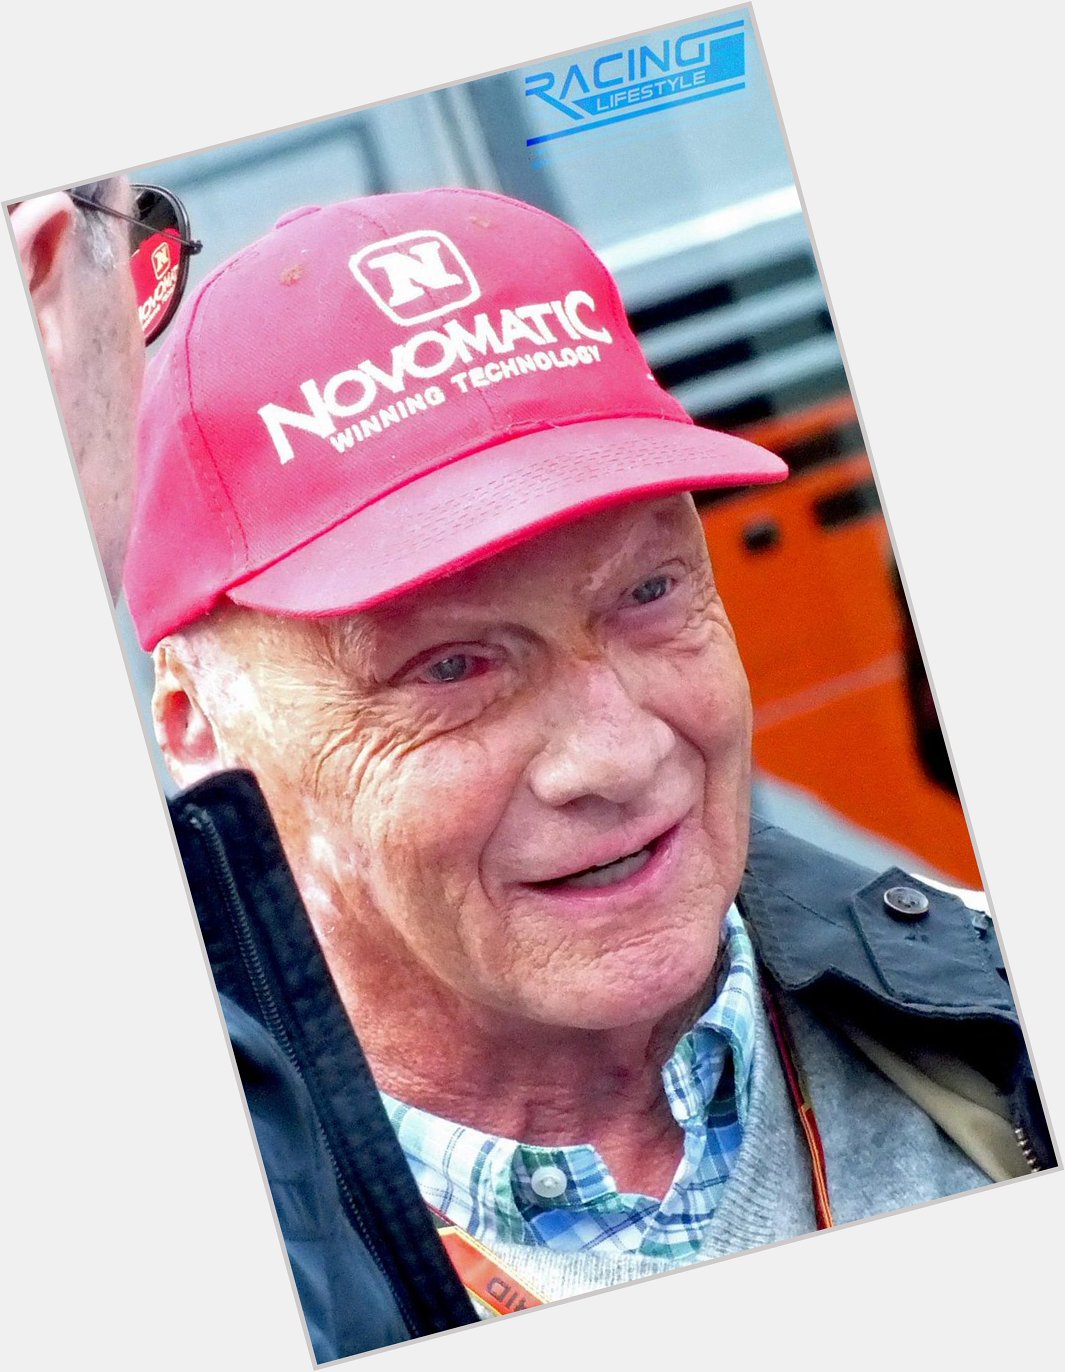 Happy birthday for 3-time Champion Niki - former     driver! 